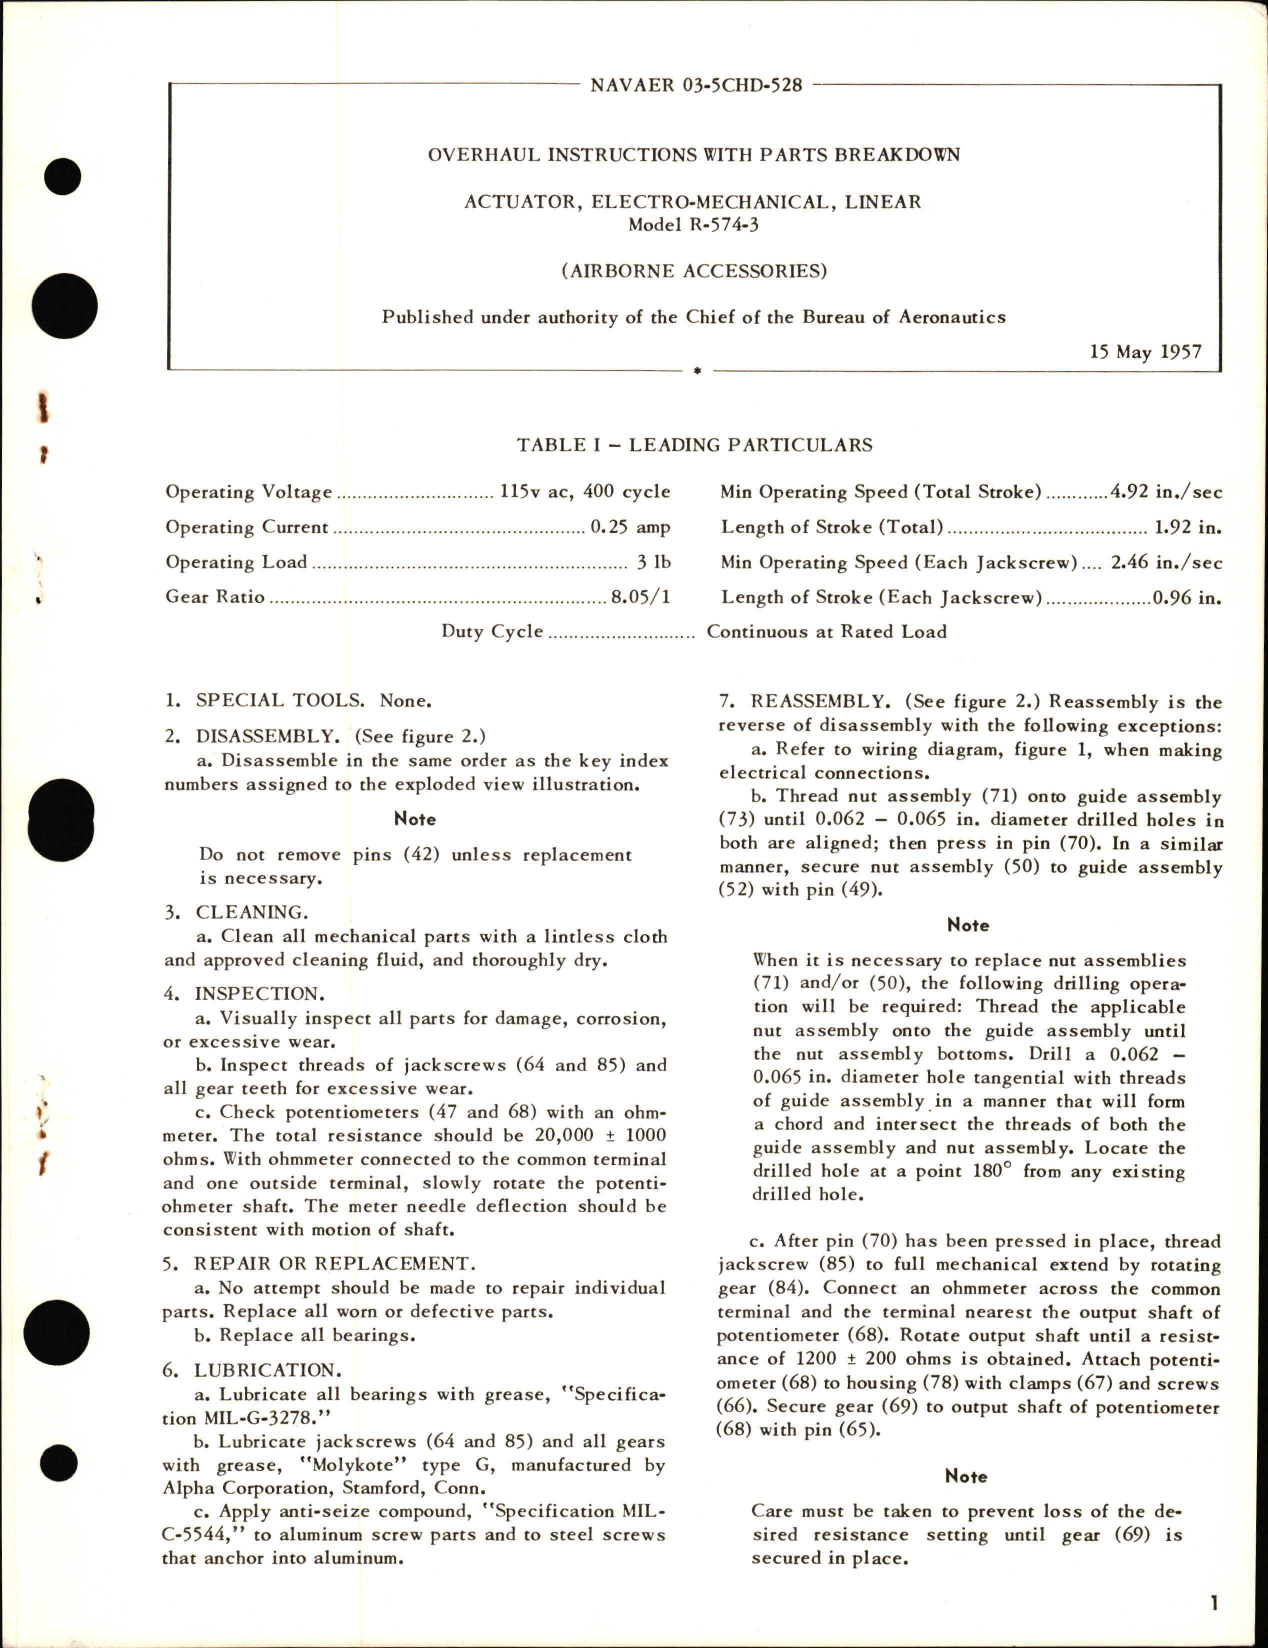 Sample page 1 from AirCorps Library document: Overhaul Instructions with Parts Breakdown for Actuator, Electro-Mechanical, Linear Model R-574-3